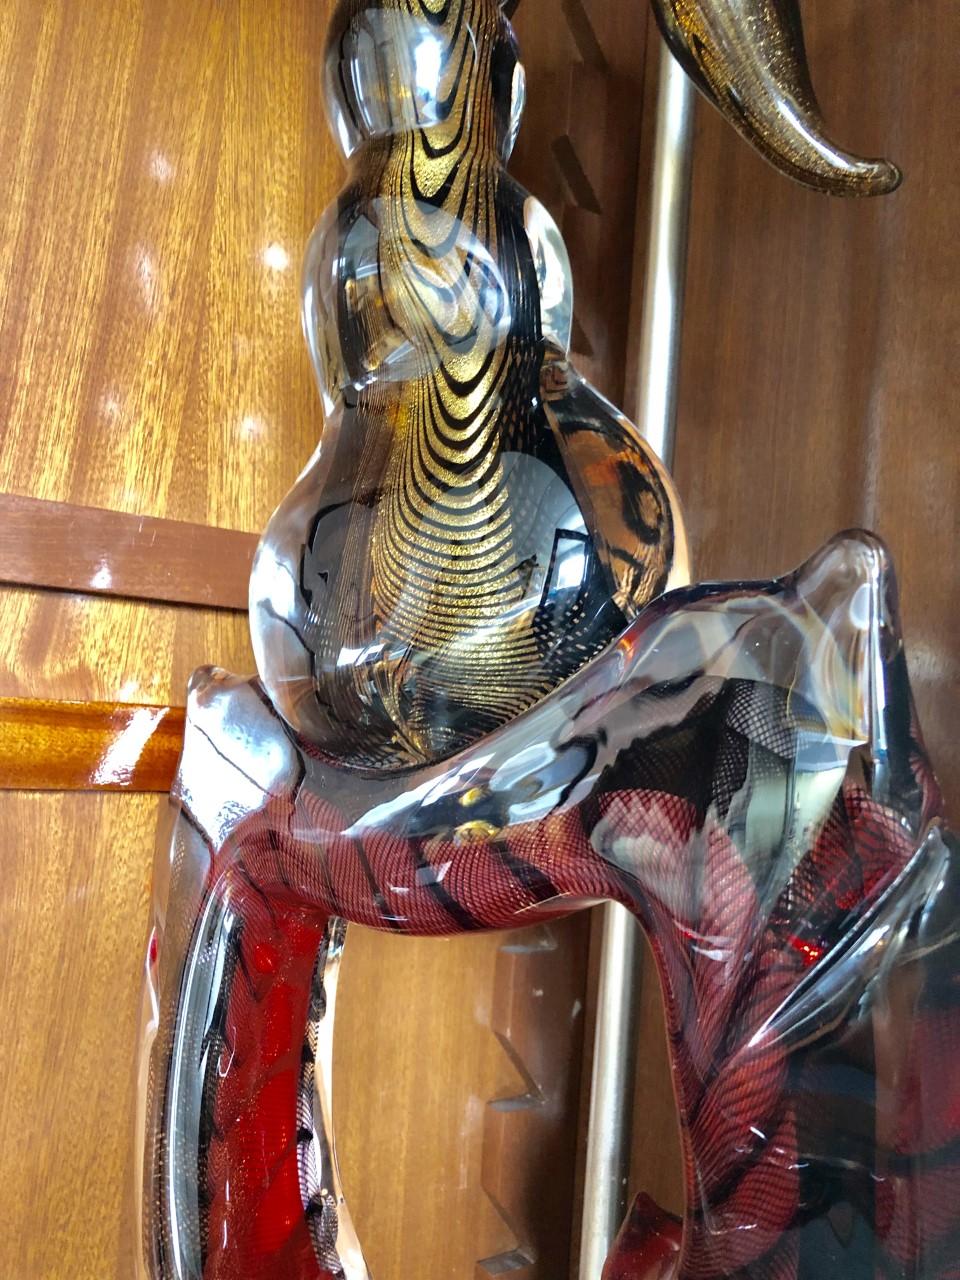 A fascinating glass figure of a scorpion
Signed.
Designed as a scorpion with a metal and marble stand
Measures: Height 26 in., (66.04 cm.), width 10 1/2 in., (26.67 cm.), depth 6 3/4 in. (17.14 cm.).
 
 